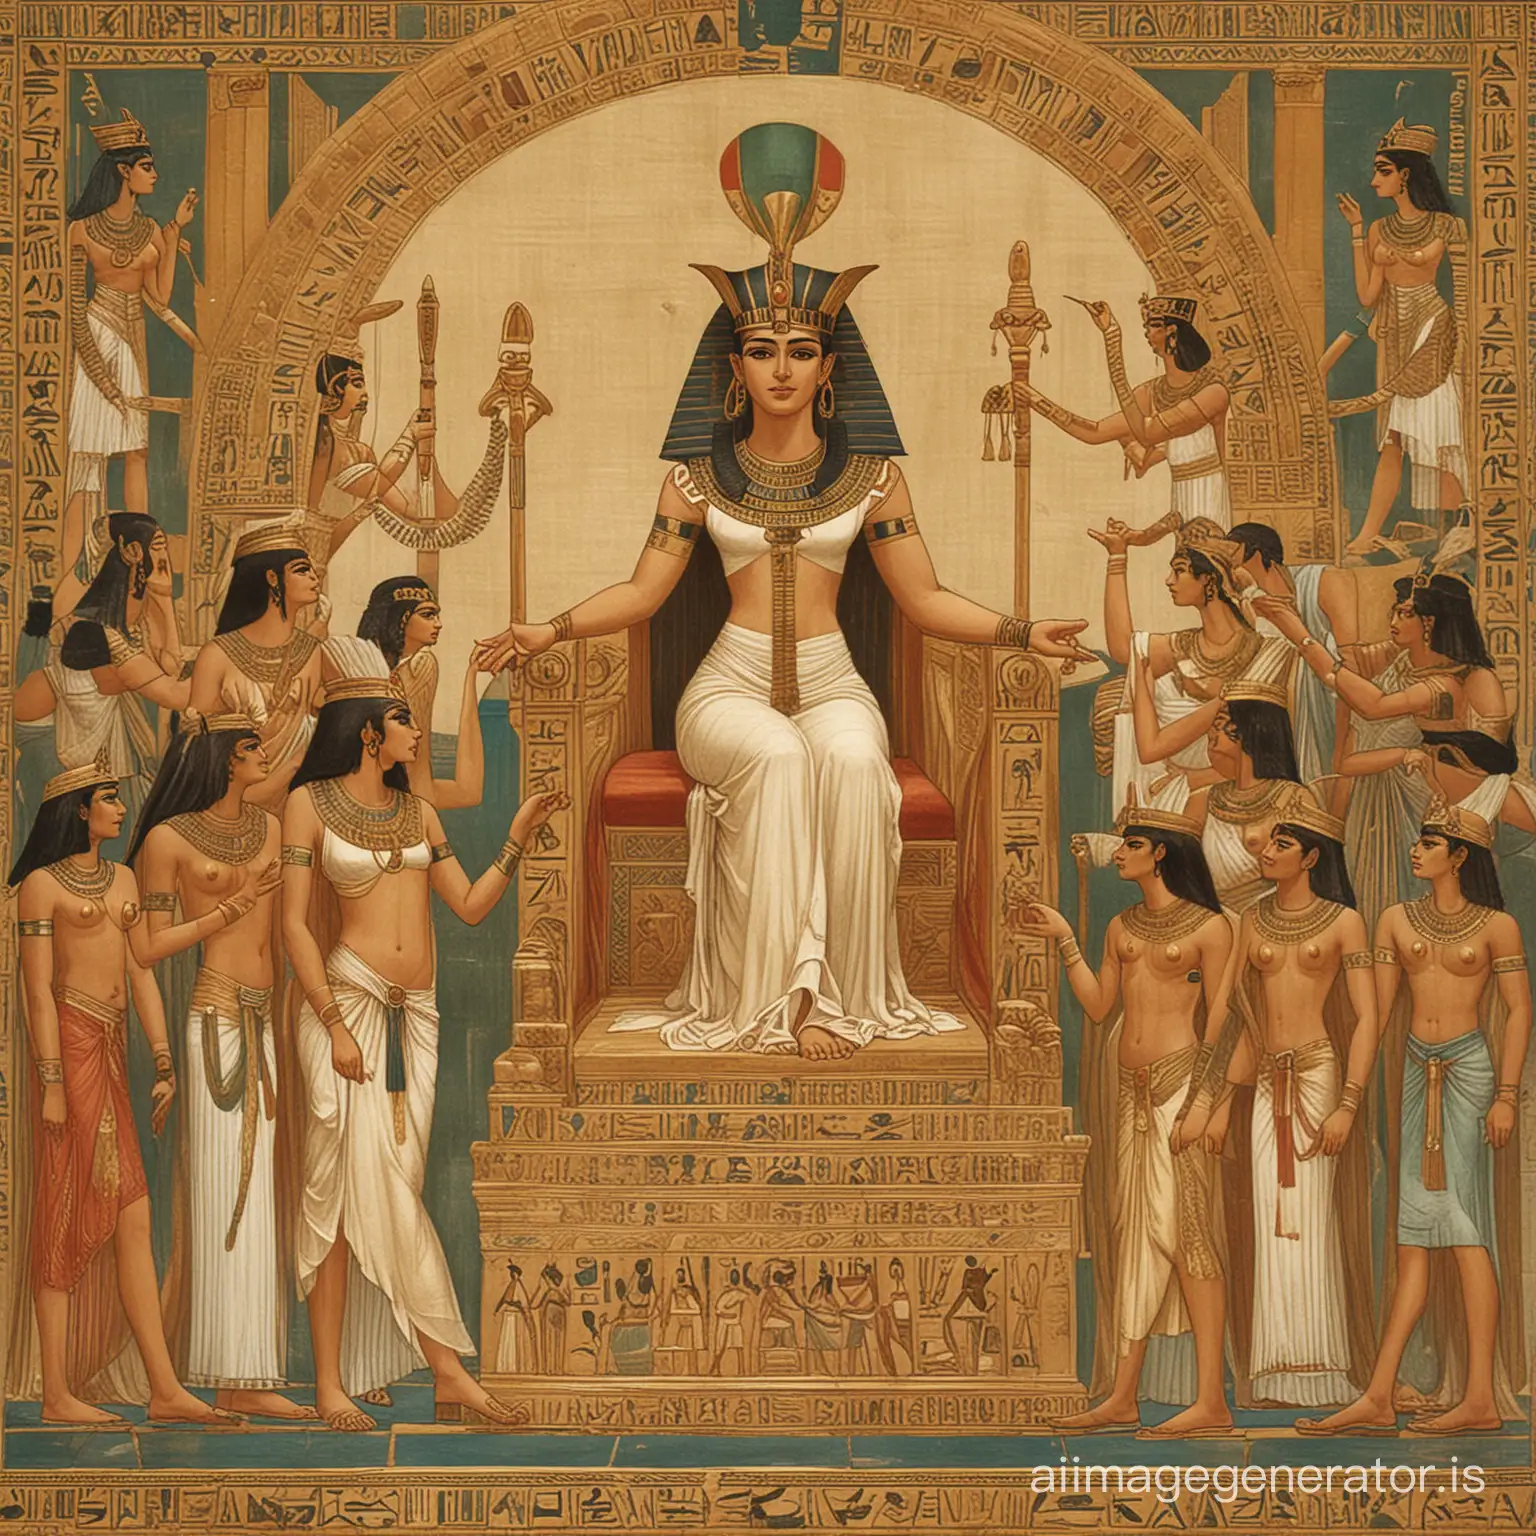 An illustration of Cleopatra seated on her throne, surrounded by advisors, courtiers, and servants. The image could capture the opulence of ancient Egyptian royalty, with rich fabrics, gold adornments, and symbols of power.